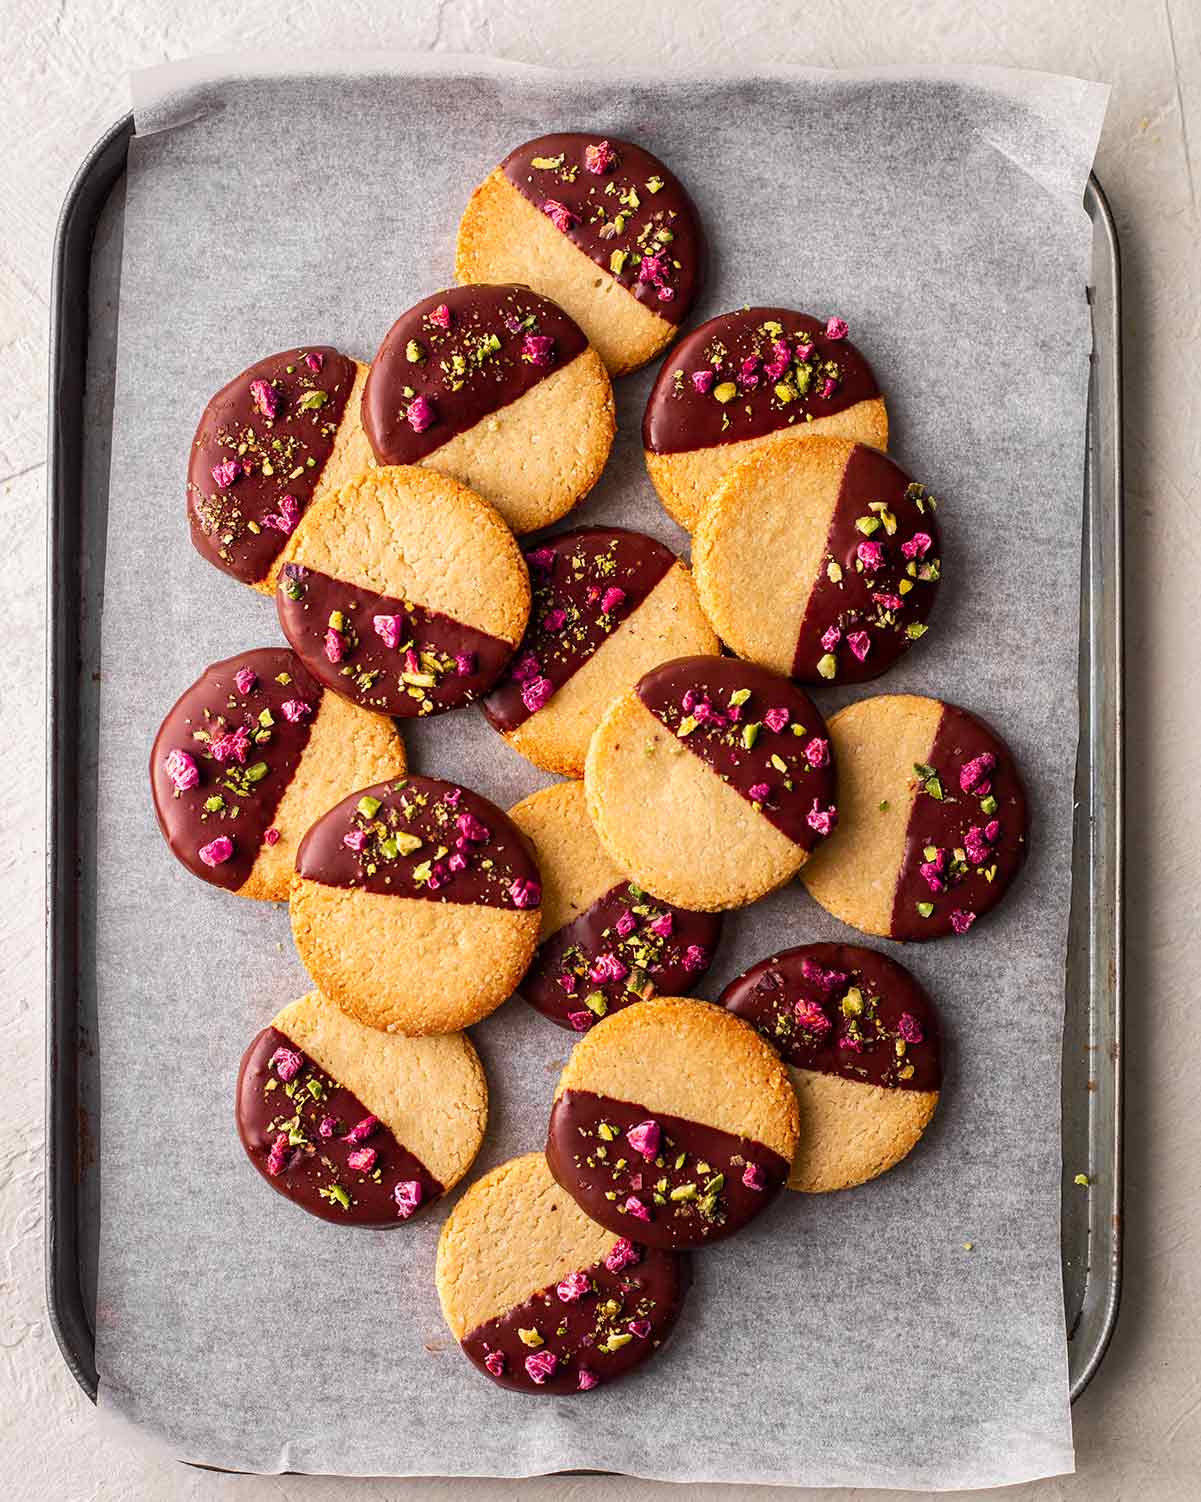 Almond flour cookies half dipped in chocolate with pistachios and freeze dried raspberries sprinkled on the chocolate. Cookies are on a lined baking tray.